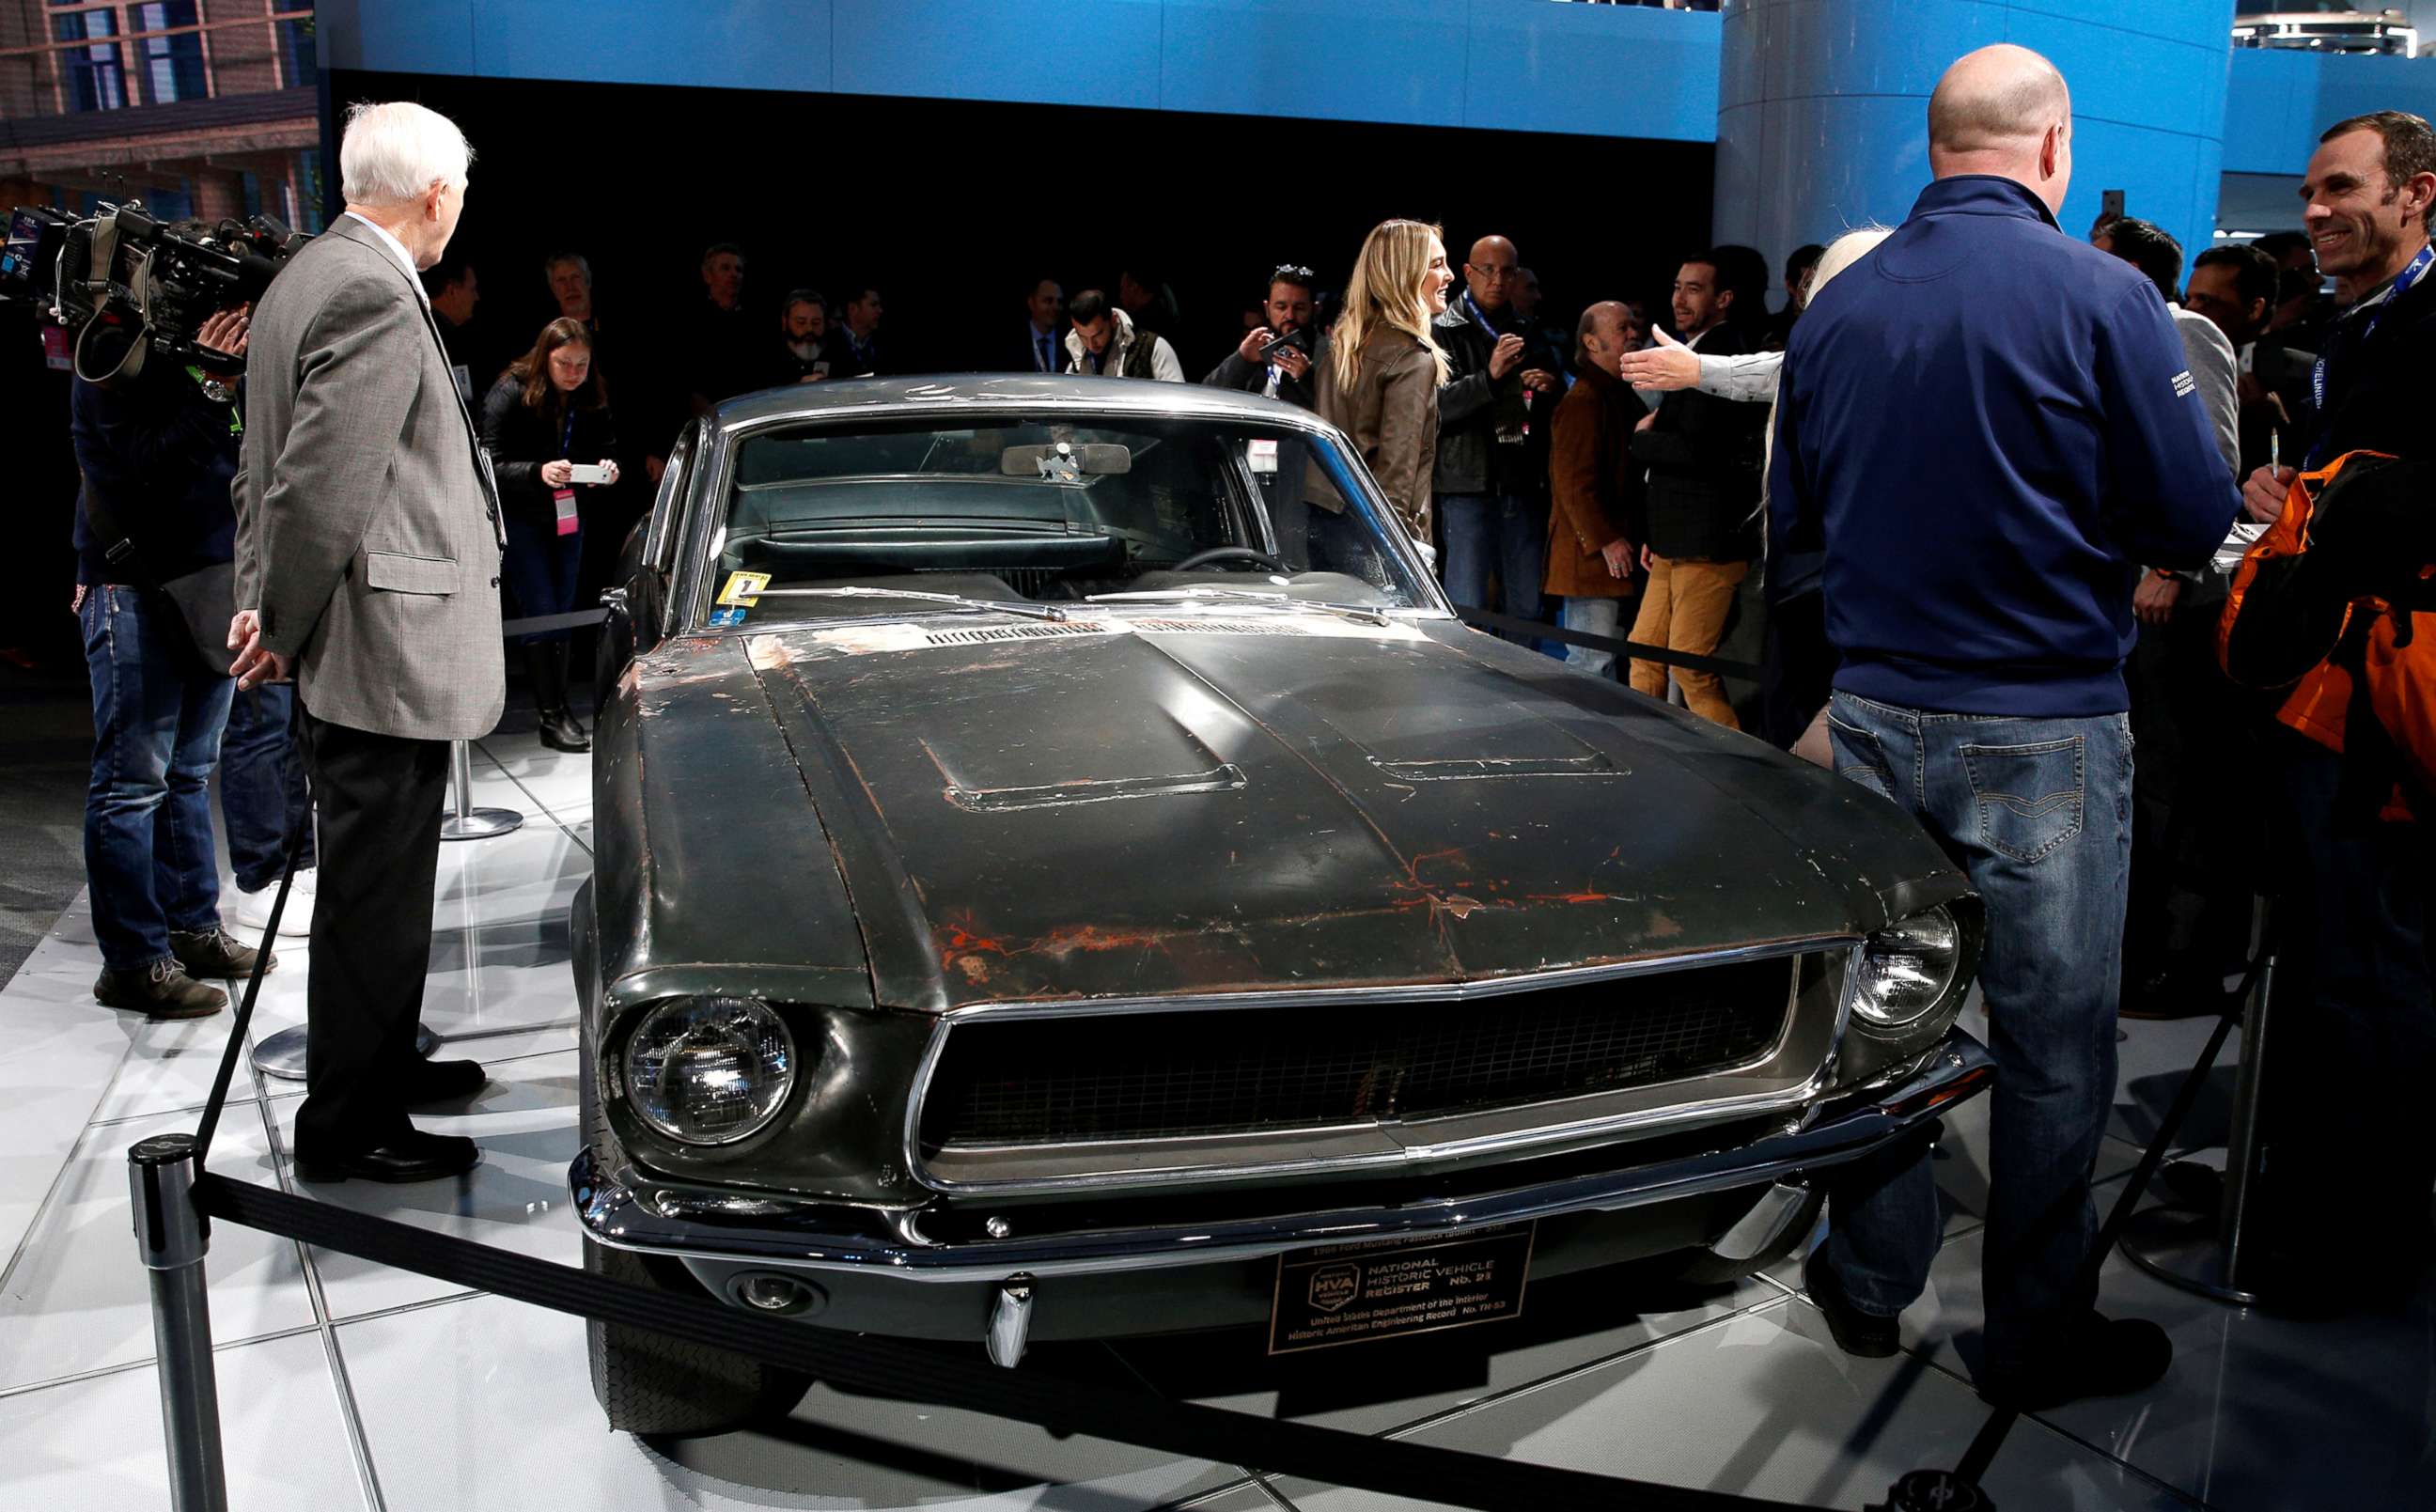 PHOTO: One of the most famed cars from American cinema, the 1968 Ford Mustang, used in the car chase scene in the Steve McQueen's movie "Bullitt" is presented at the North American International Auto Show in Detroit, Jan. 14, 2018.